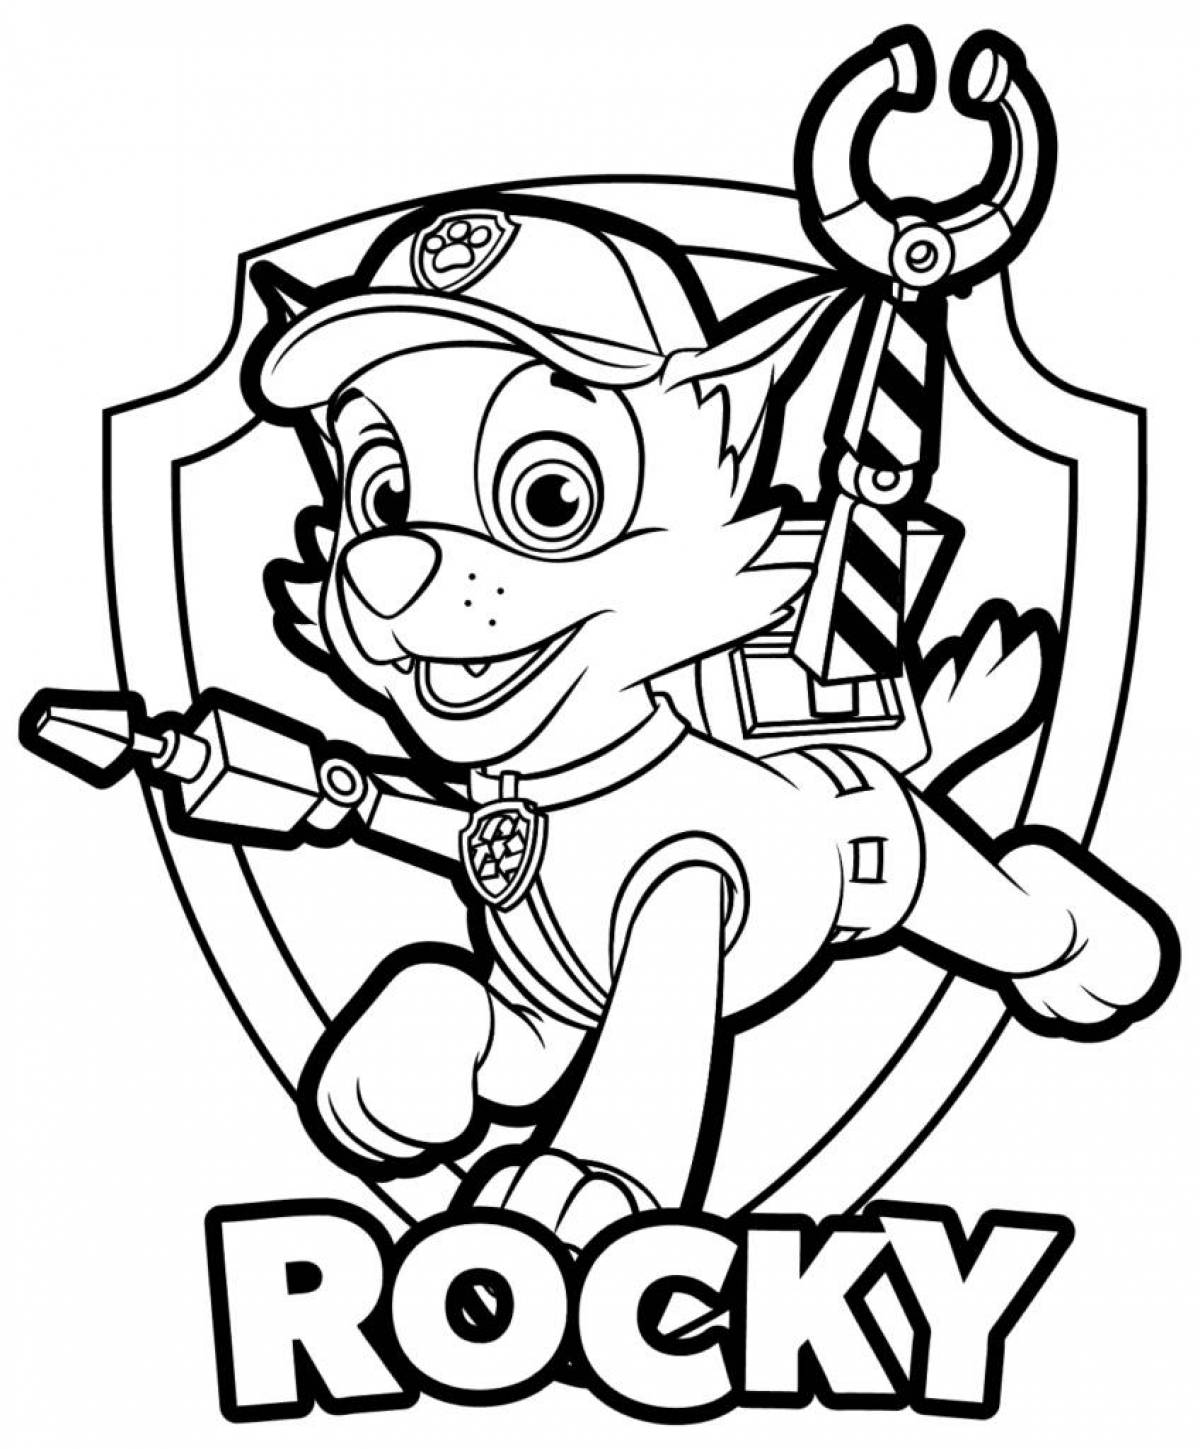 Outstanding paw patrol coloring page for 6-7 year olds